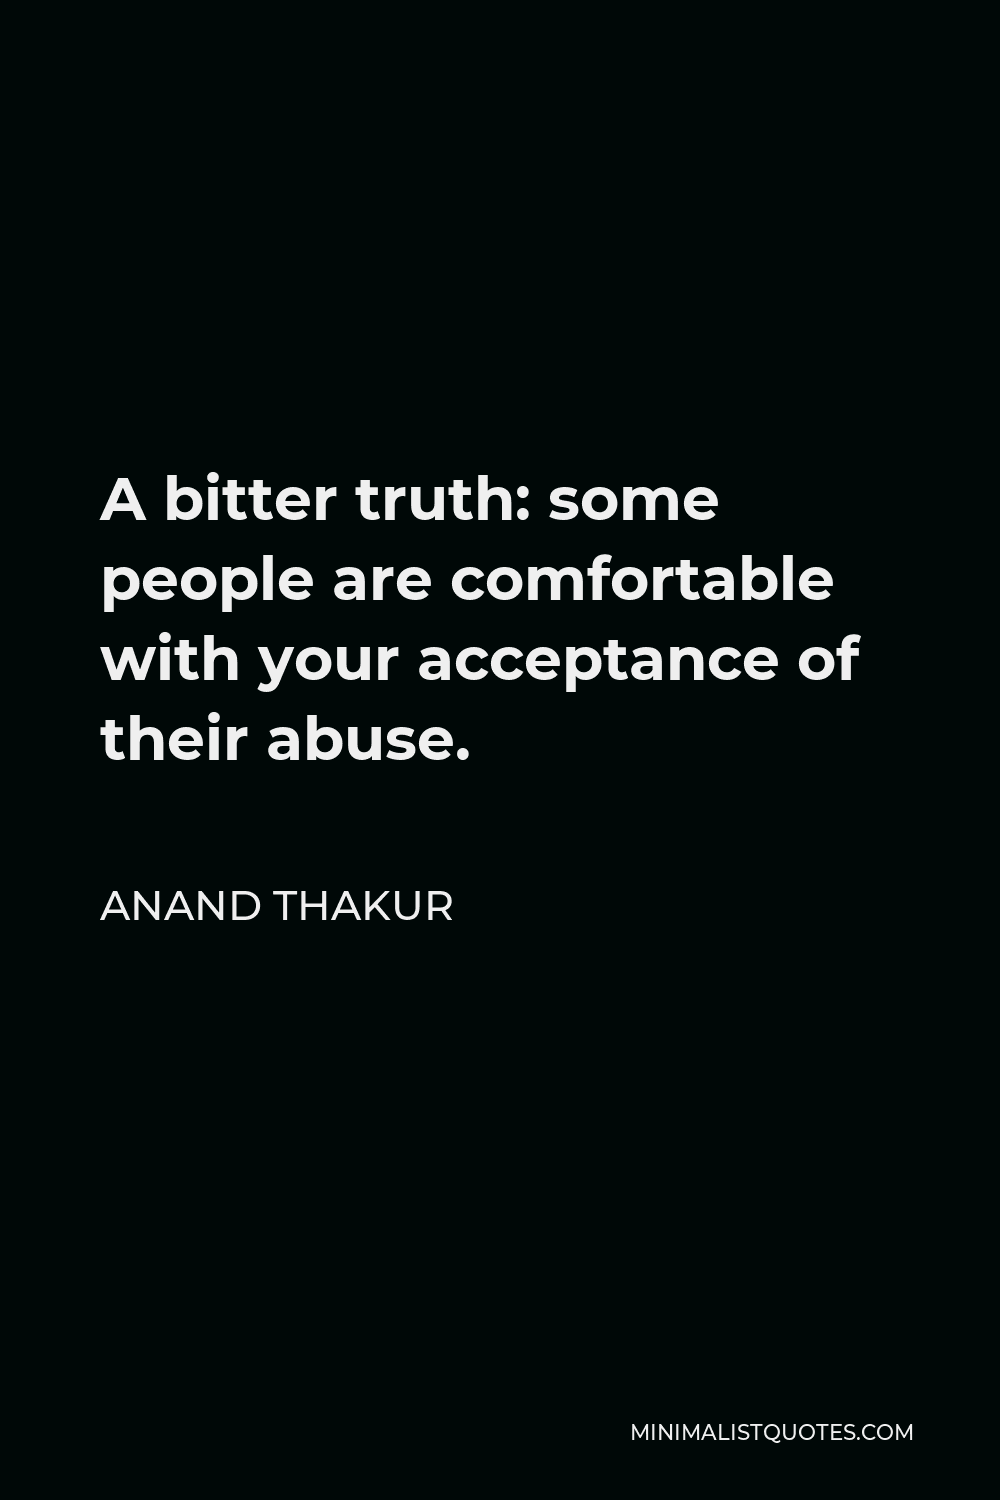 Anand Thakur Quote - A bitter truth: some people are comfortable with your acceptance of their abuse.